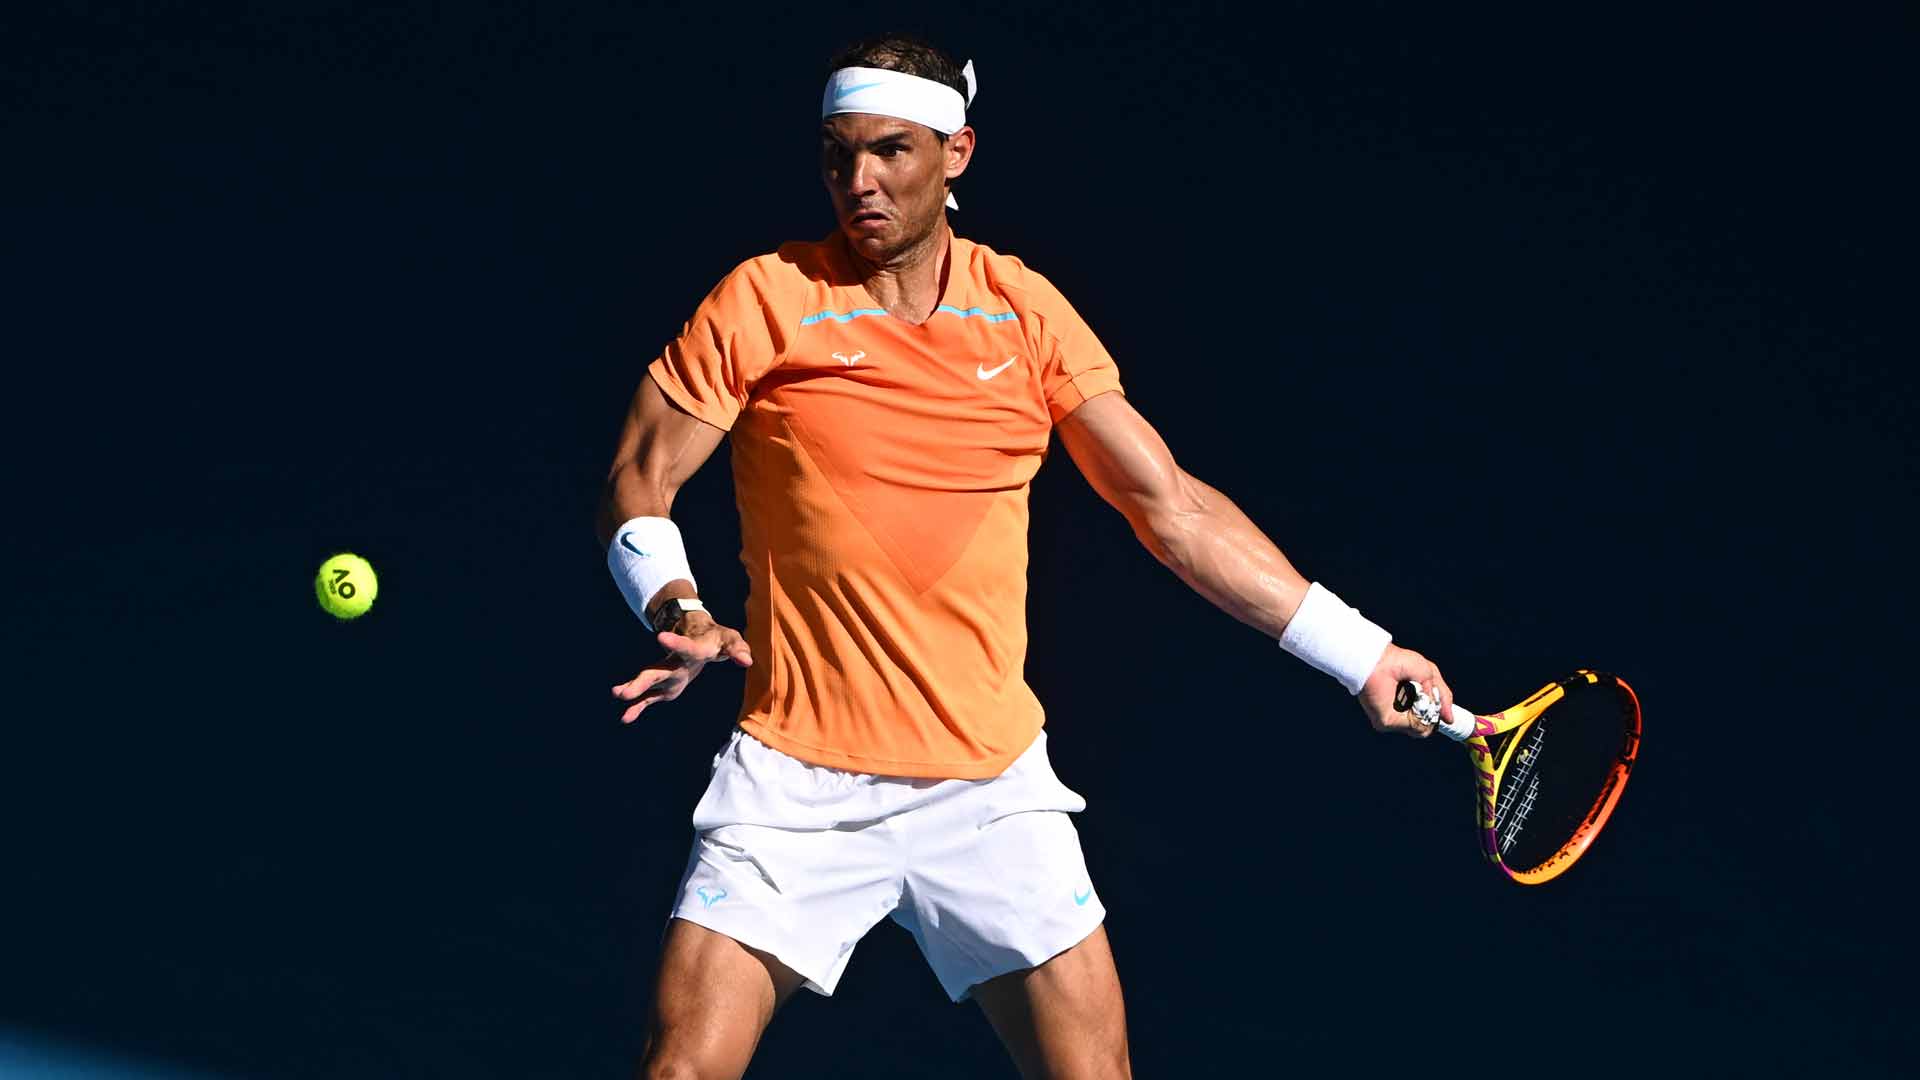 Rafael Nadal will compete in Brisbane for the first time since 2017.